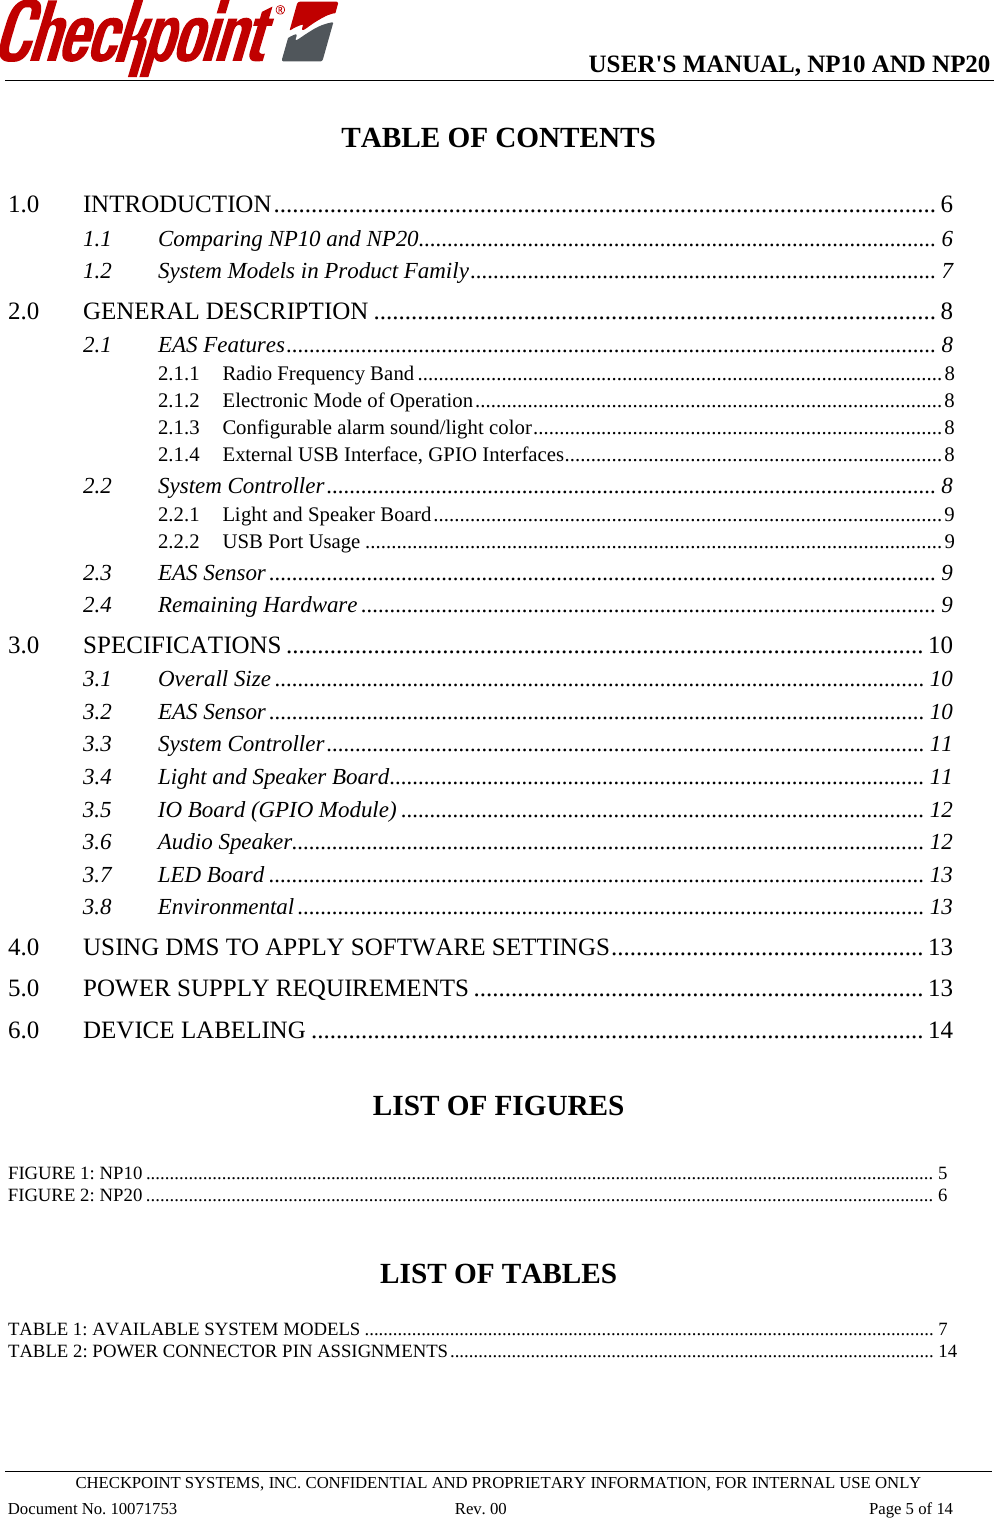   USER&apos;S MANUAL, NP10 AND NP20   CHECKPOINT SYSTEMS, INC. CONFIDENTIAL AND PROPRIETARY INFORMATION, FOR INTERNAL USE ONLY Document No. 10071753 Rev. 00 Page 5 of 14 TABLE OF CONTENTS  1.0 INTRODUCTION .......................................................................................................... 6 1.1 Comparing NP10 and NP20 .......................................................................................... 6 1.2 System Models in Product Family ................................................................................. 7 2.0 GENERAL DESCRIPTION .......................................................................................... 8 2.1 EAS Features ................................................................................................................. 8 2.1.1 Radio Frequency Band .................................................................................................... 8 2.1.2 Electronic Mode of Operation ......................................................................................... 8 2.1.3 Configurable alarm sound/light color .............................................................................. 8 2.1.4 External USB Interface, GPIO Interfaces ........................................................................ 8 2.2 System Controller .......................................................................................................... 8 2.2.1 Light and Speaker Board ................................................................................................. 9 2.2.2 USB Port Usage .............................................................................................................. 9 2.3 EAS Sensor .................................................................................................................... 9 2.4 Remaining Hardware .................................................................................................... 9 3.0 SPECIFICATIONS ...................................................................................................... 10 3.1 Overall Size ................................................................................................................. 10 3.2 EAS Sensor .................................................................................................................. 10 3.3 System Controller ........................................................................................................ 11 3.4 Light and Speaker Board ............................................................................................. 11 3.5 IO Board (GPIO Module) ........................................................................................... 12 3.6 Audio Speaker.............................................................................................................. 12 3.7 LED Board .................................................................................................................. 13 3.8 Environmental ............................................................................................................. 13 4.0 USING DMS TO APPLY SOFTWARE SETTINGS .................................................. 13 5.0 POWER SUPPLY REQUIREMENTS ........................................................................ 13 6.0 DEVICE LABELING .................................................................................................. 14   LIST OF FIGURES  FIGURE 1: NP10 ...................................................................................................................................................................... 5 FIGURE 2: NP20 ...................................................................................................................................................................... 6   LIST OF TABLES  TABLE 1: AVAILABLE SYSTEM MODELS ........................................................................................................................ 7 TABLE 2: POWER CONNECTOR PIN ASSIGNMENTS ...................................................................................................... 14    